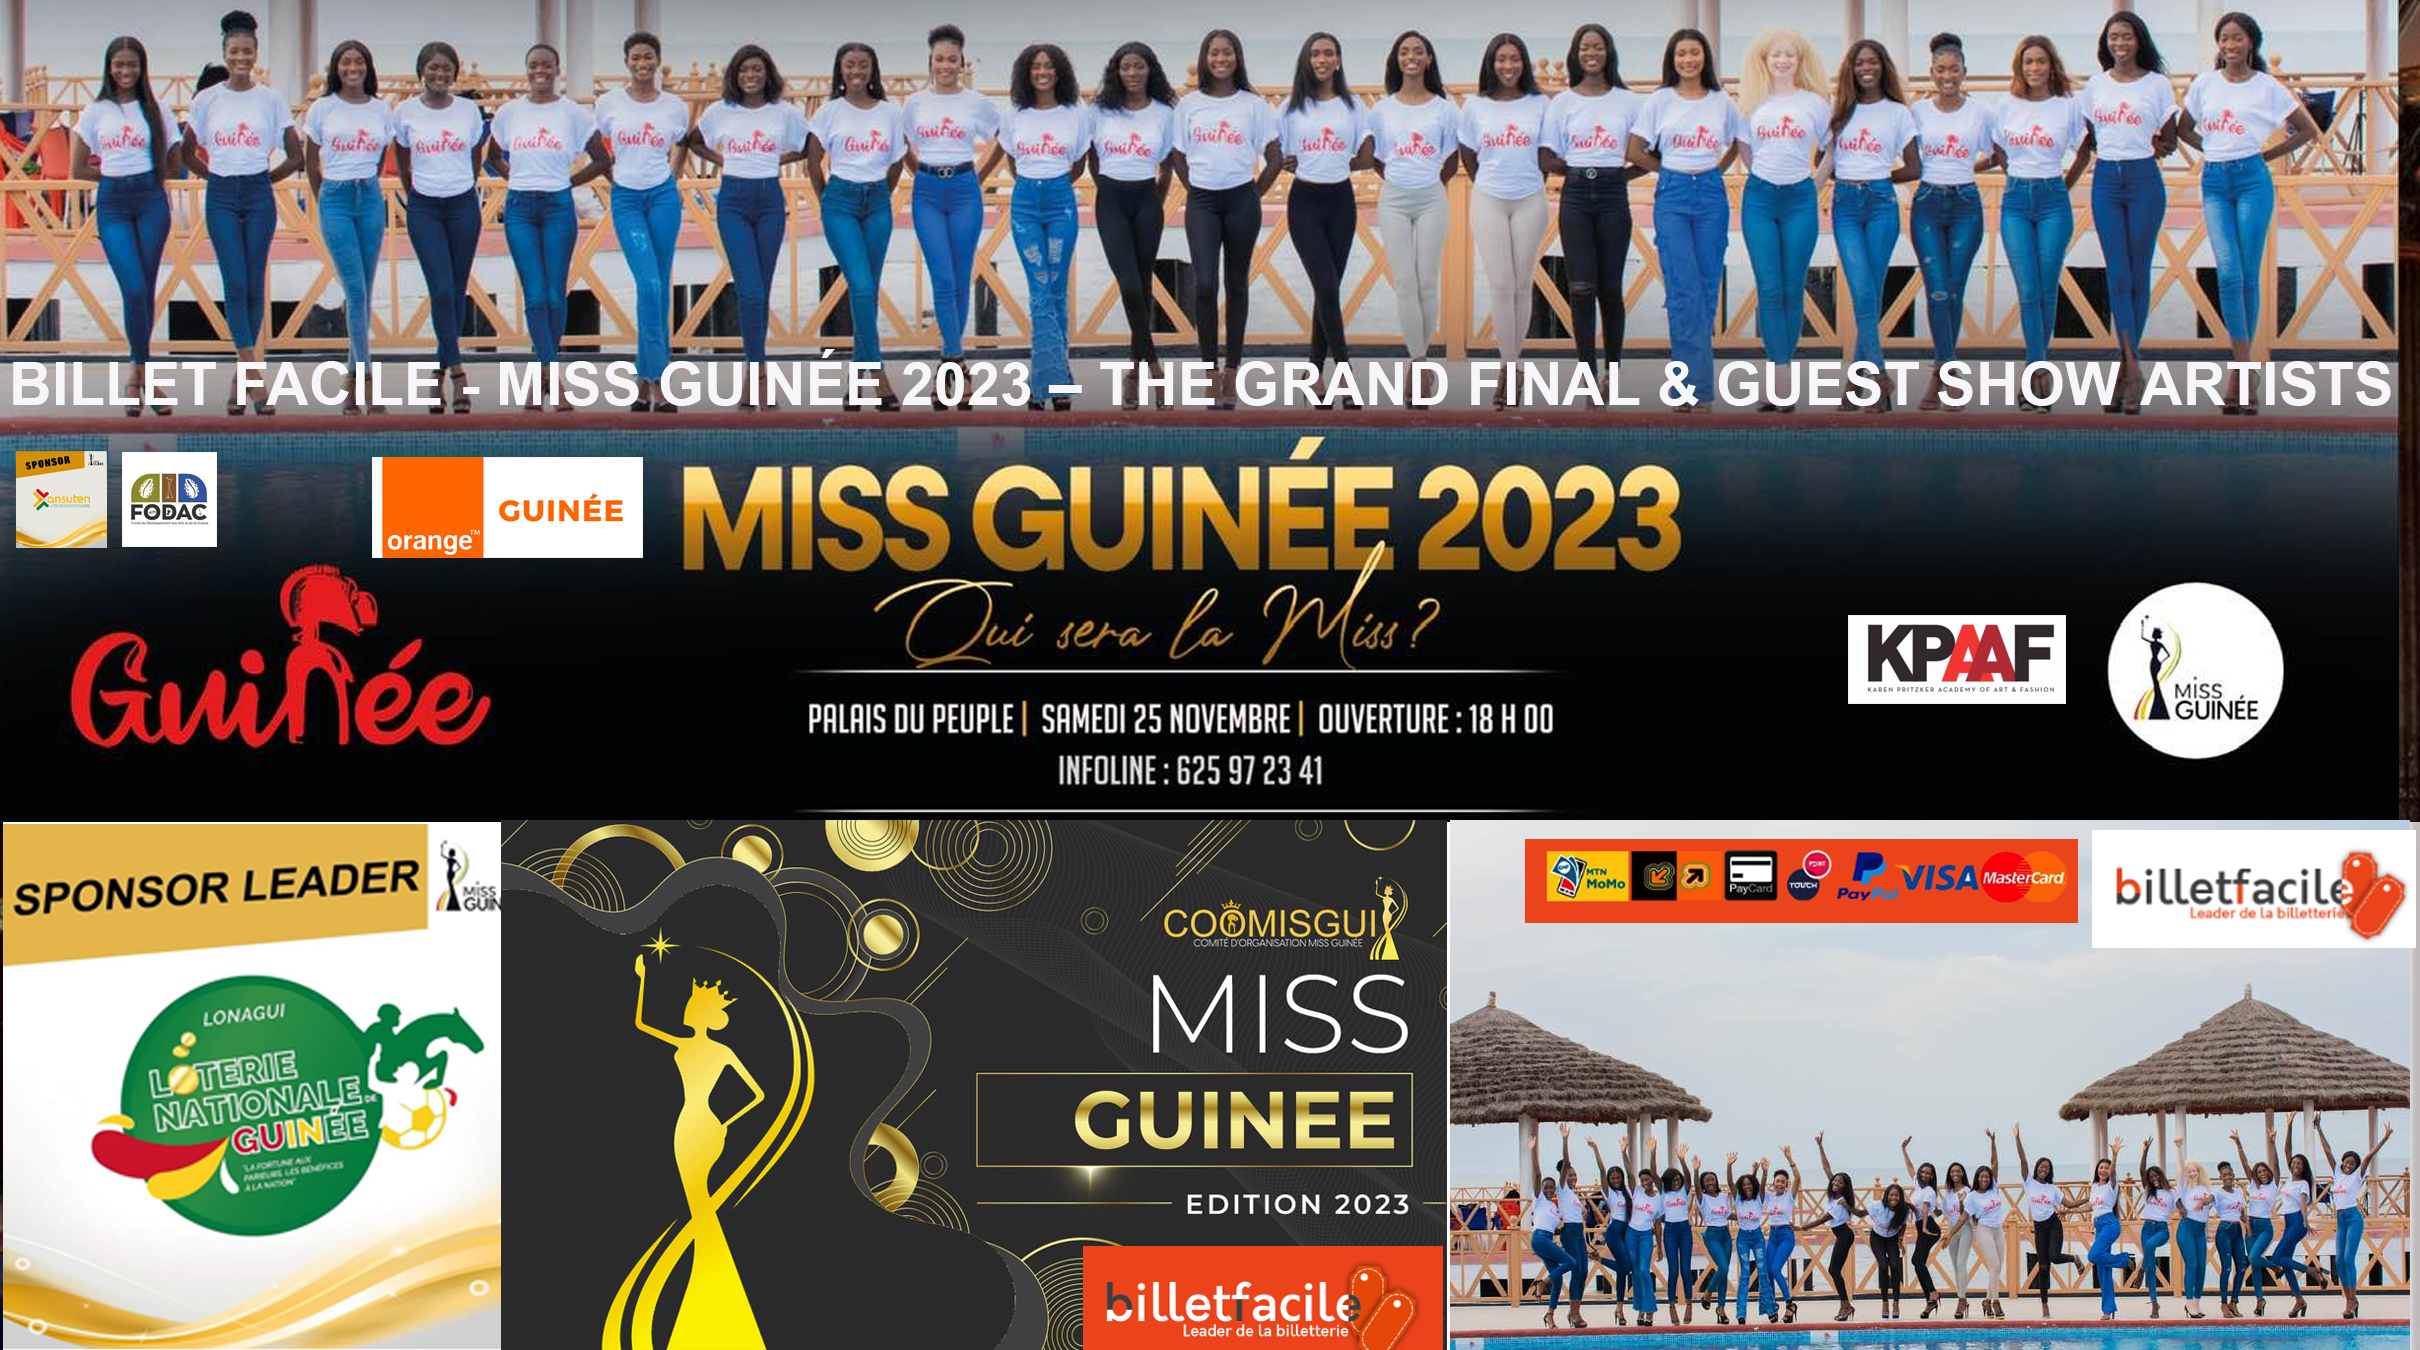 BILLET FACILE – MISS GUINÉE 2023 – THE GRAND FINAL & GUEST SHOW MUSIC WITH THE PRESENCE OF BLACK M AND YOUSSOUPHA AS GUEST AND OTHER ARTISTS